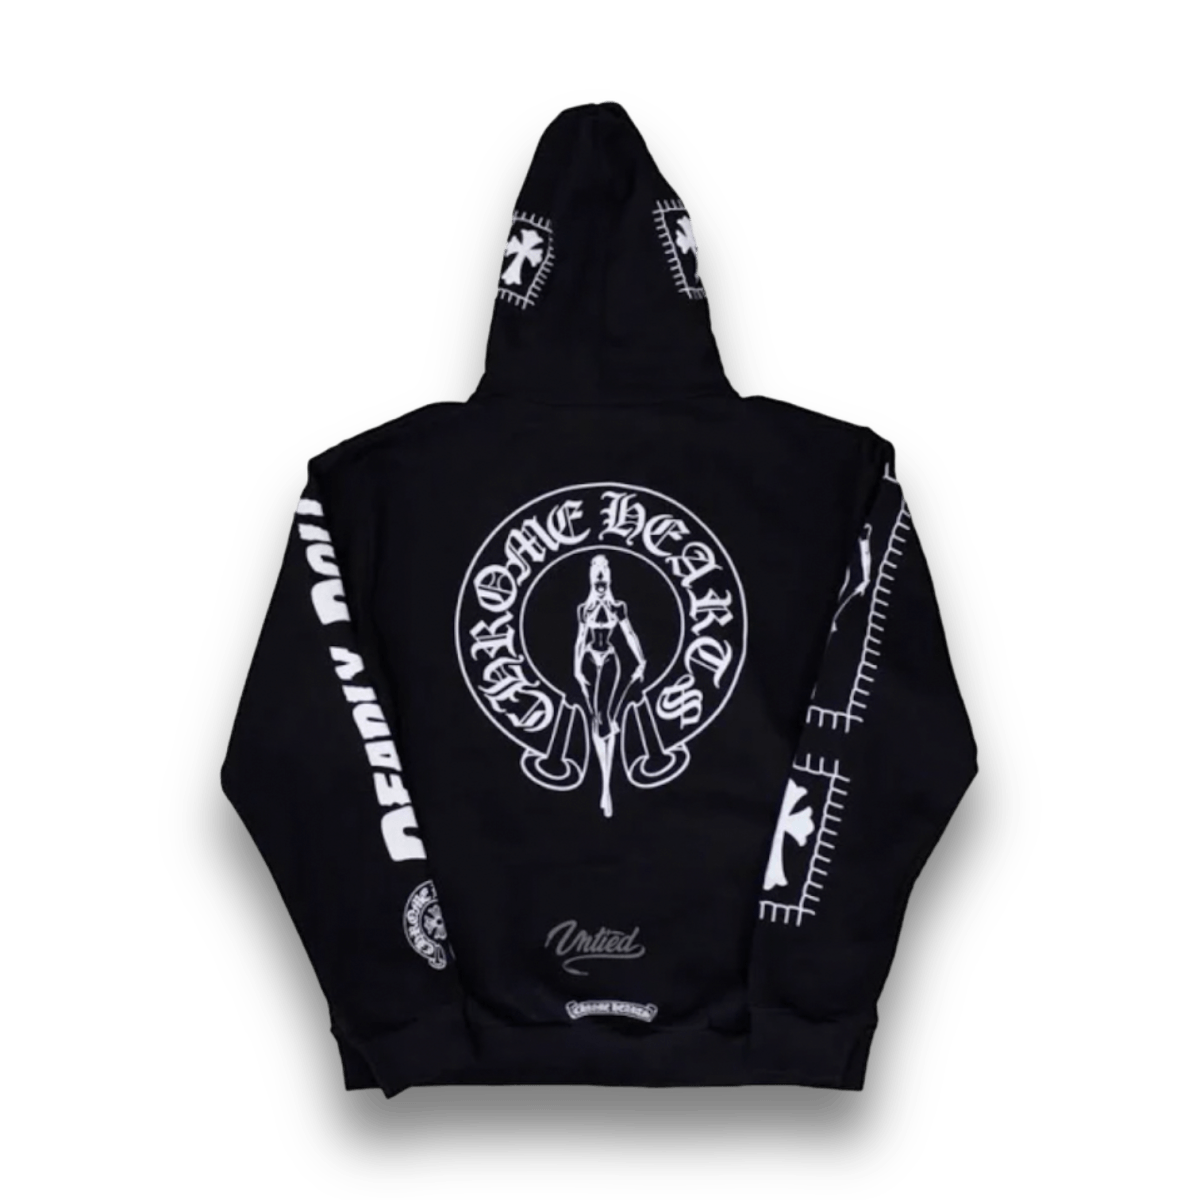 Chrome Hearts Deadly Doll Hoodie Black White - Hoodie - Chrome Hearts - Jawns on Fire